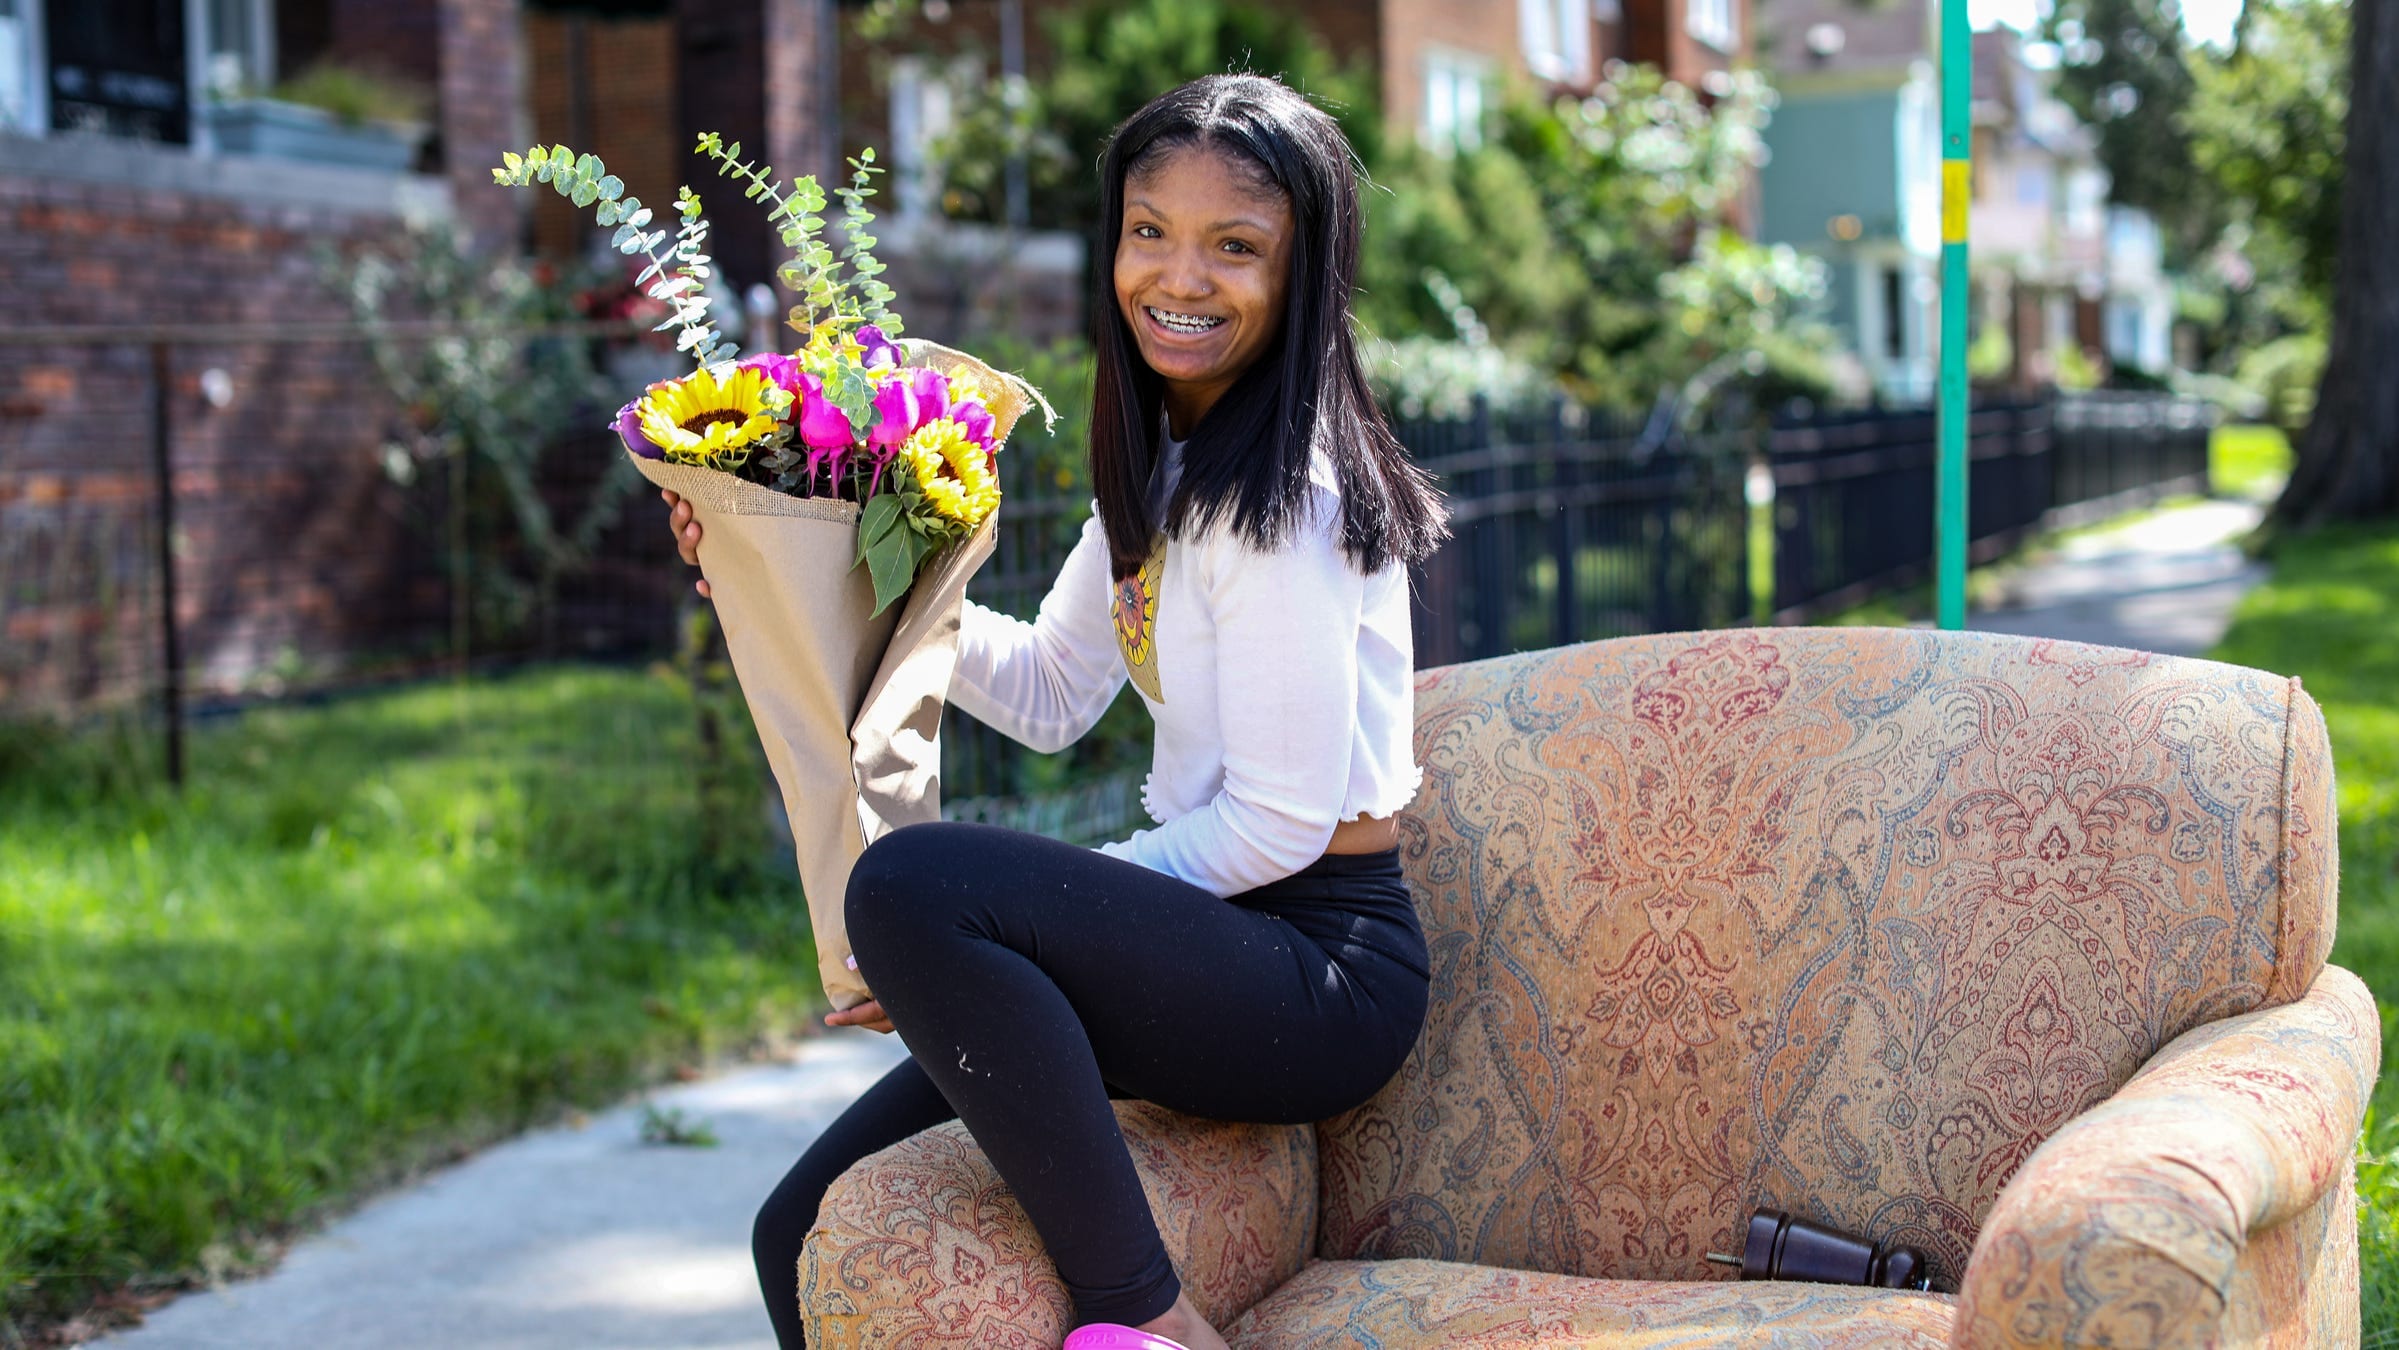 Young entrepreneur finds the right formula to grow Detroit Flower Company